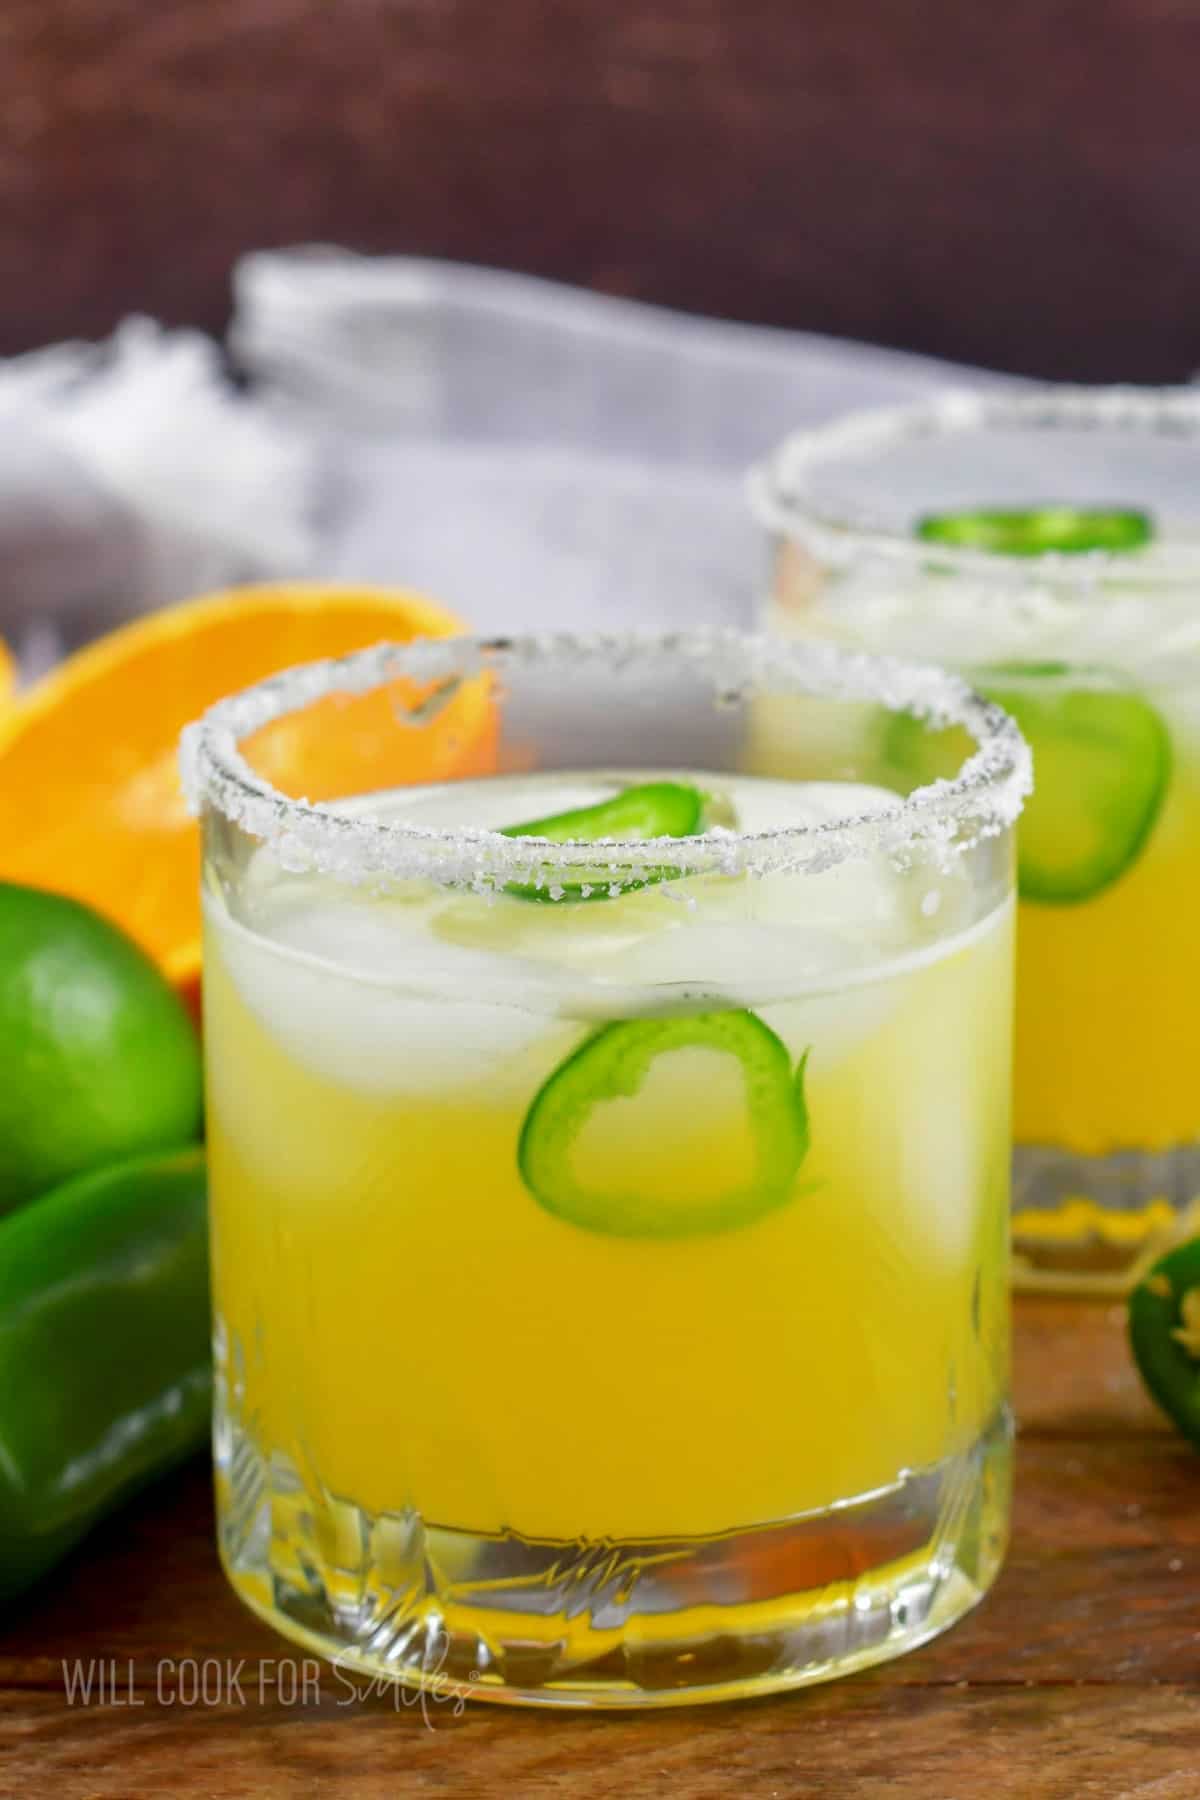 short glass with yellow spicy margarita with salted rim and jalapeno slices.